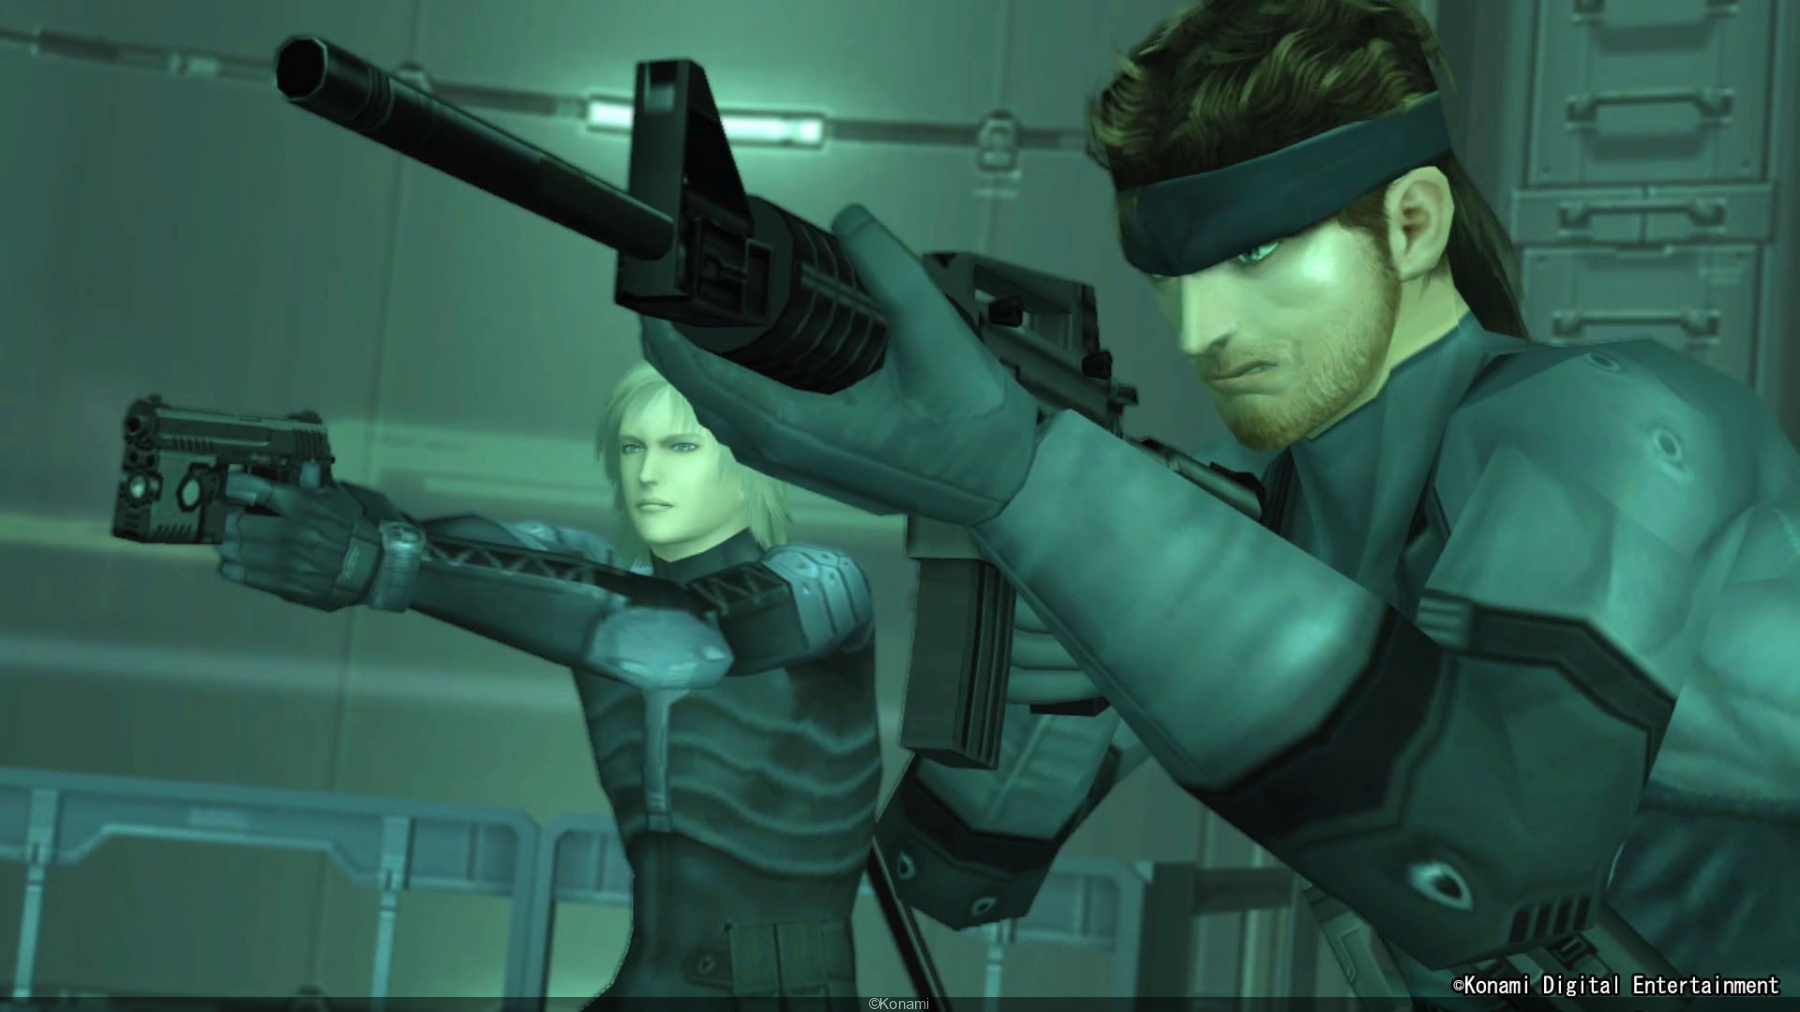 METAL GEAR SOLID Delta: SNAKE EATER and METAL GEAR SOLID: MASTER